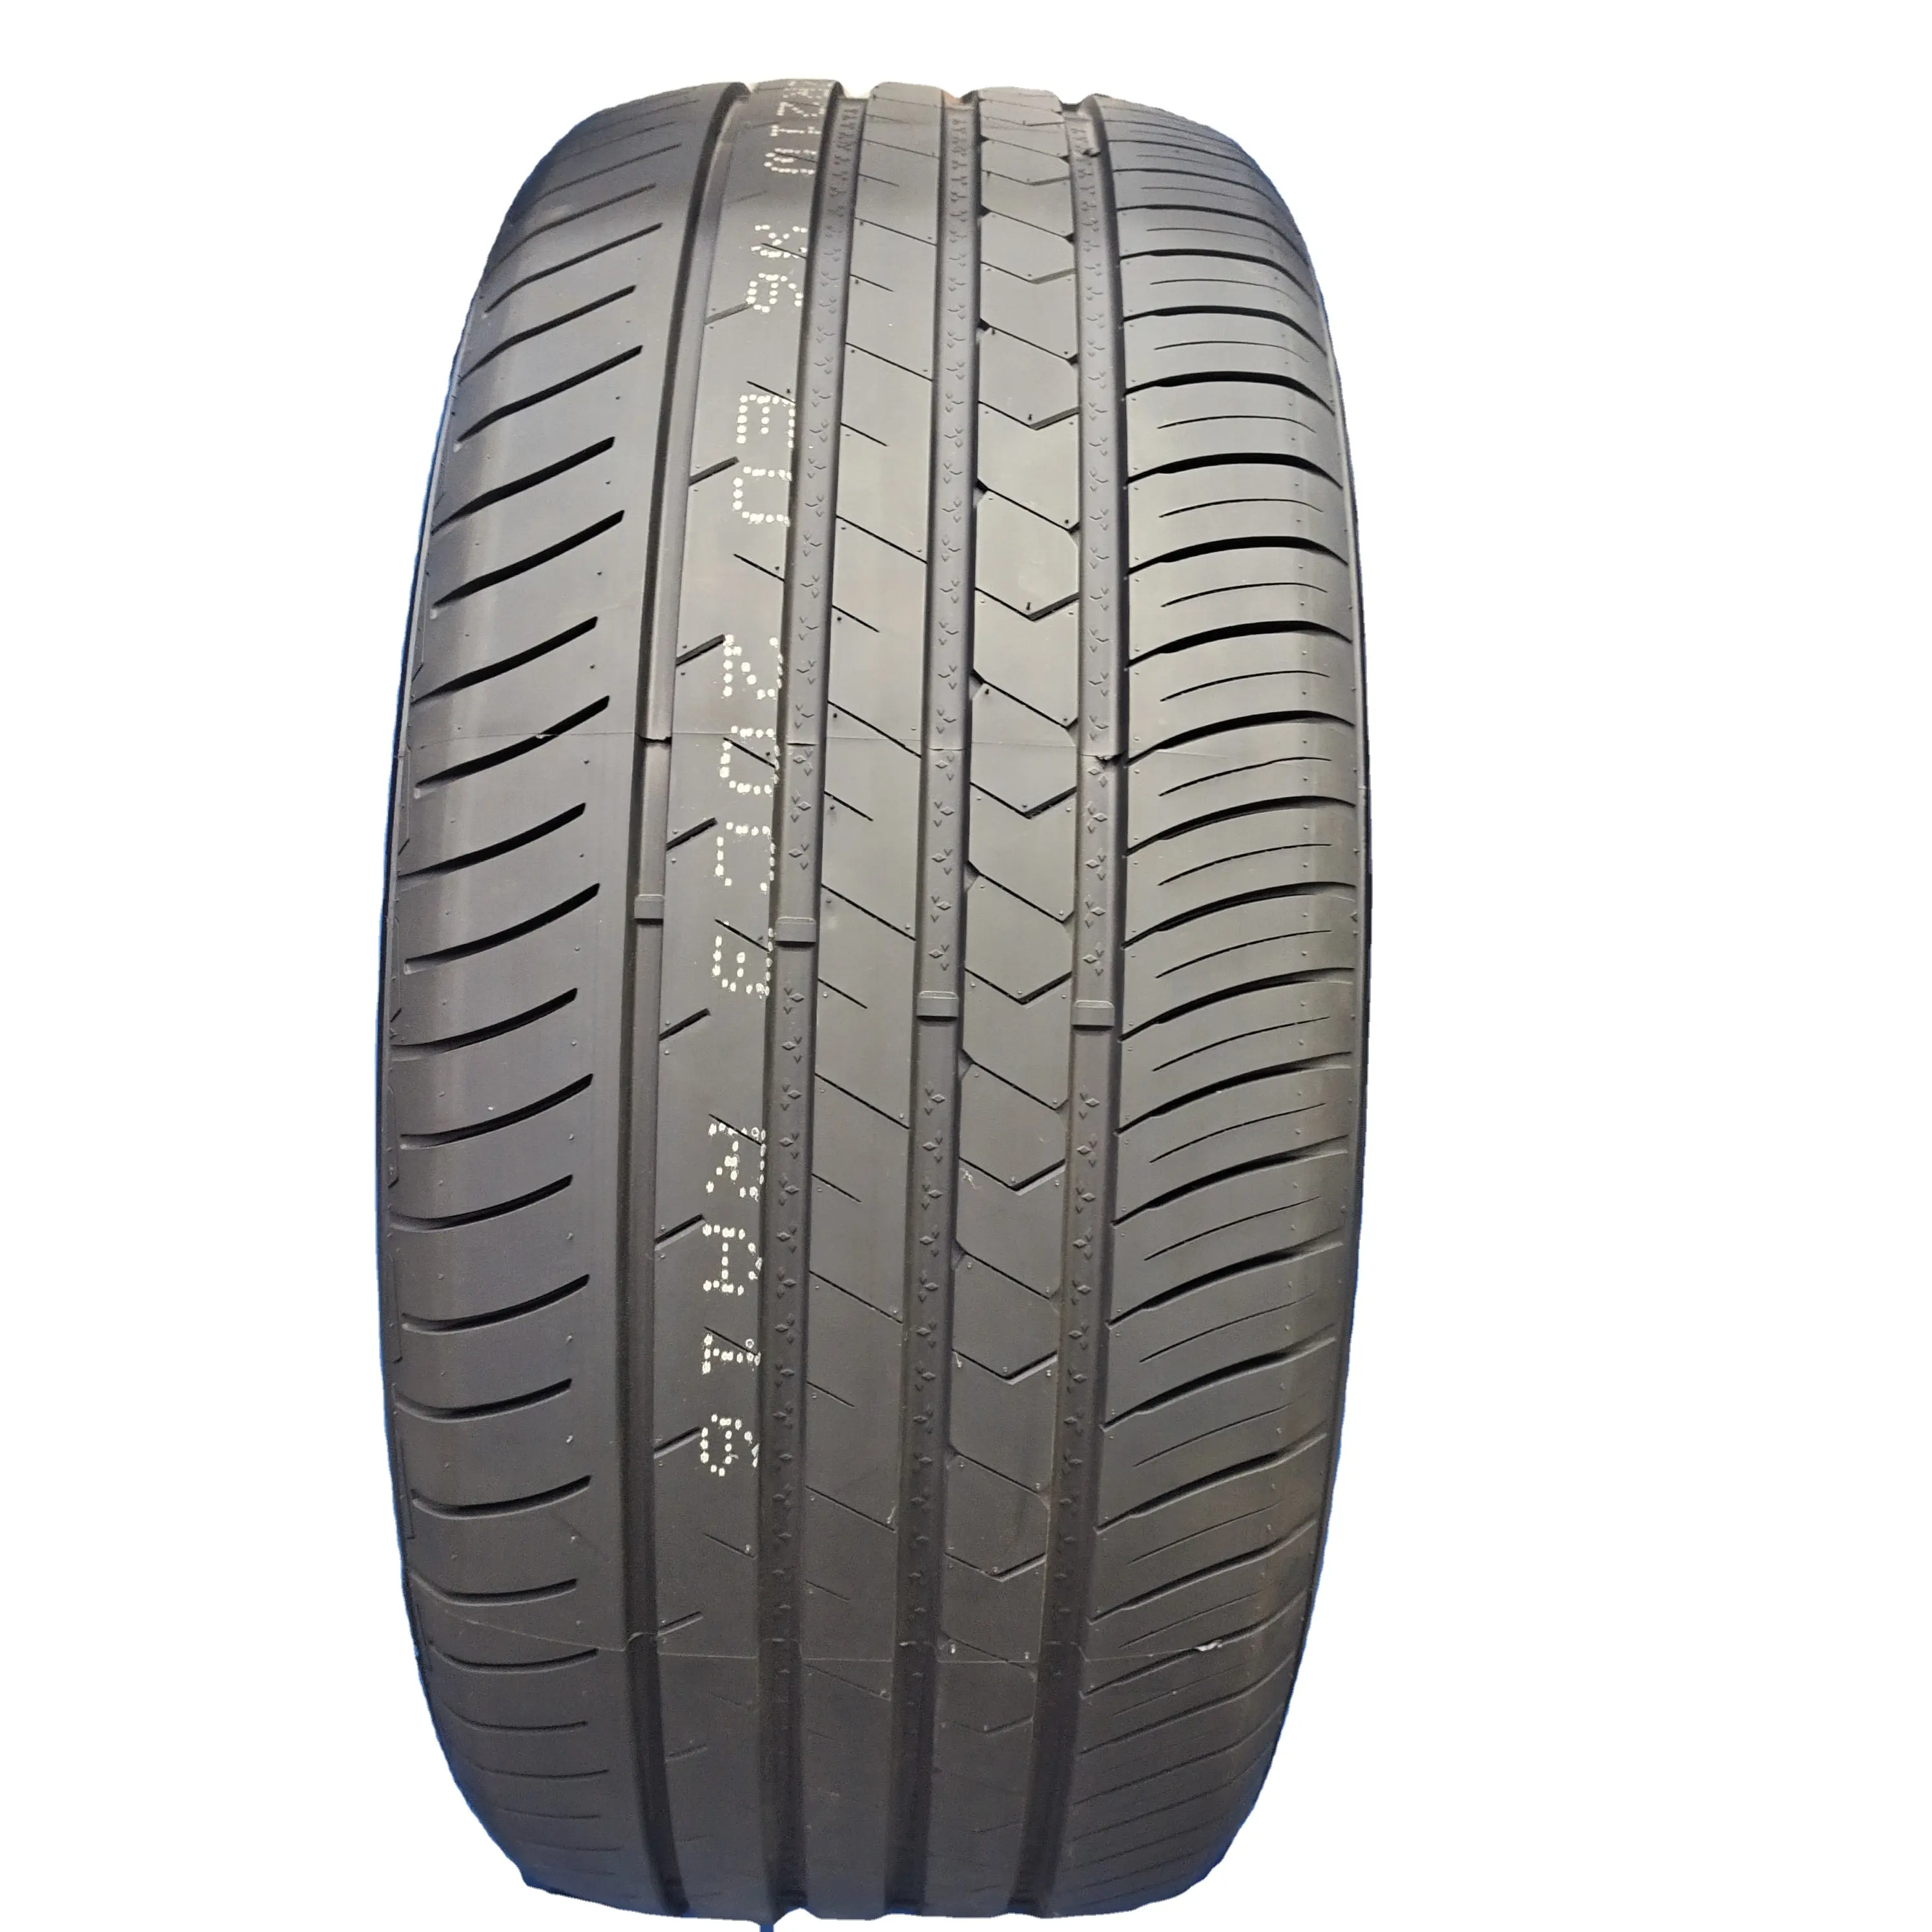 Double King Timax China Car Tyre 185 70 14 Tyres for Cars 19 Inch 235 35 Double Tyre Toy Car R12 R13 R14 R15